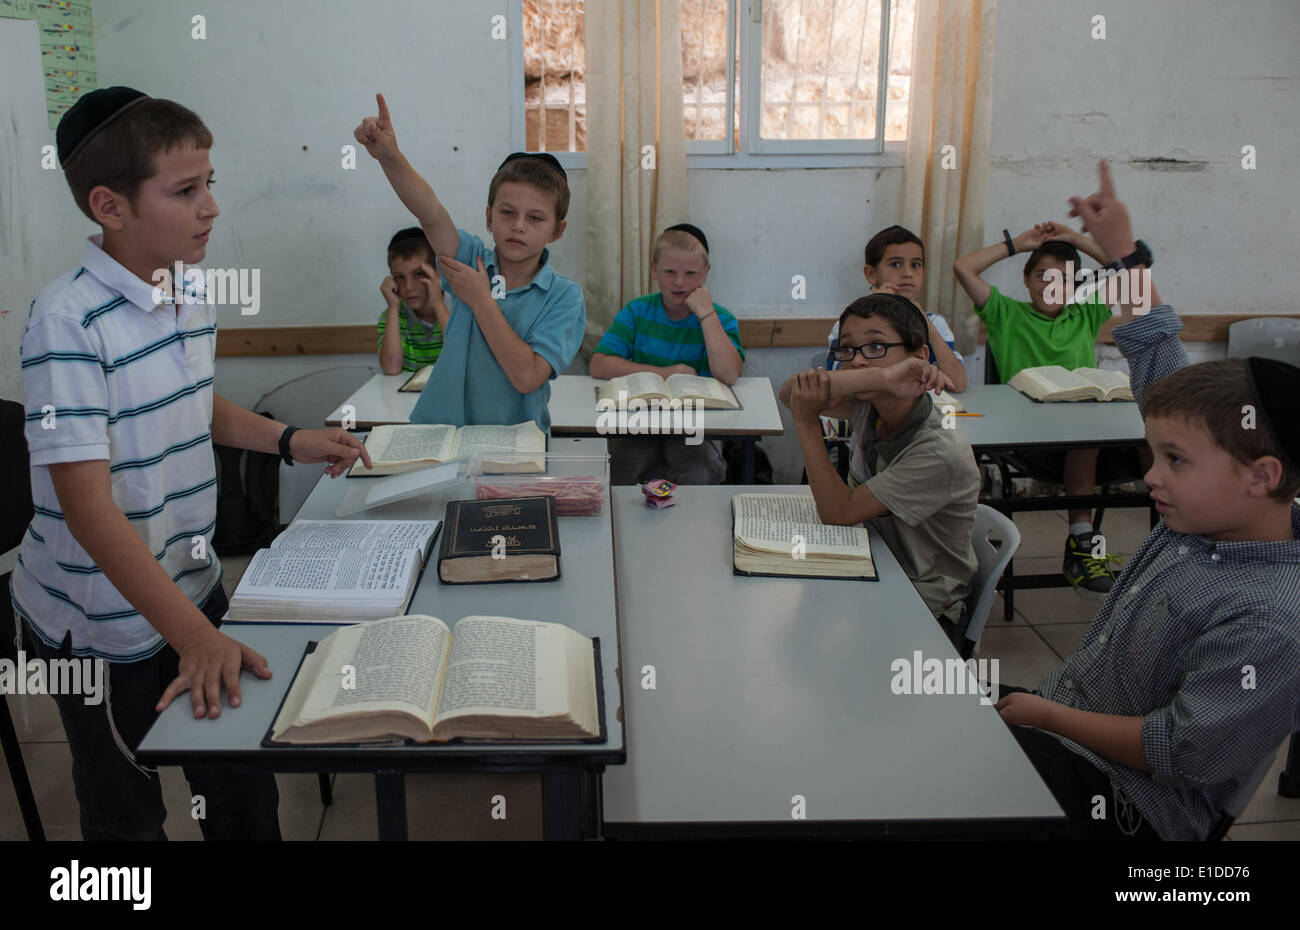 (140601) -- JERUSALEM, June 1, 2014 (Xinhua) -- Tzviel Noyman (1st L) asks a question when leading a class of Jewish religion at Torat Moshe elementary school in Beit Shemesh, about 20 km from Jerusalem, on May 29, 2014. Tzviel Noyman is an Israeli Ultra-Orthodox boy in a family with six children, three boys and three girls. He is ten years old this year and a grade three pupil of Torat Moshe elementary school, which is only opened to Jewish children. Tzviel has eight classes each day, including Hebrew, English, mathematics and Jewish religion, which has four classes each day including Talmud, Stock Photo